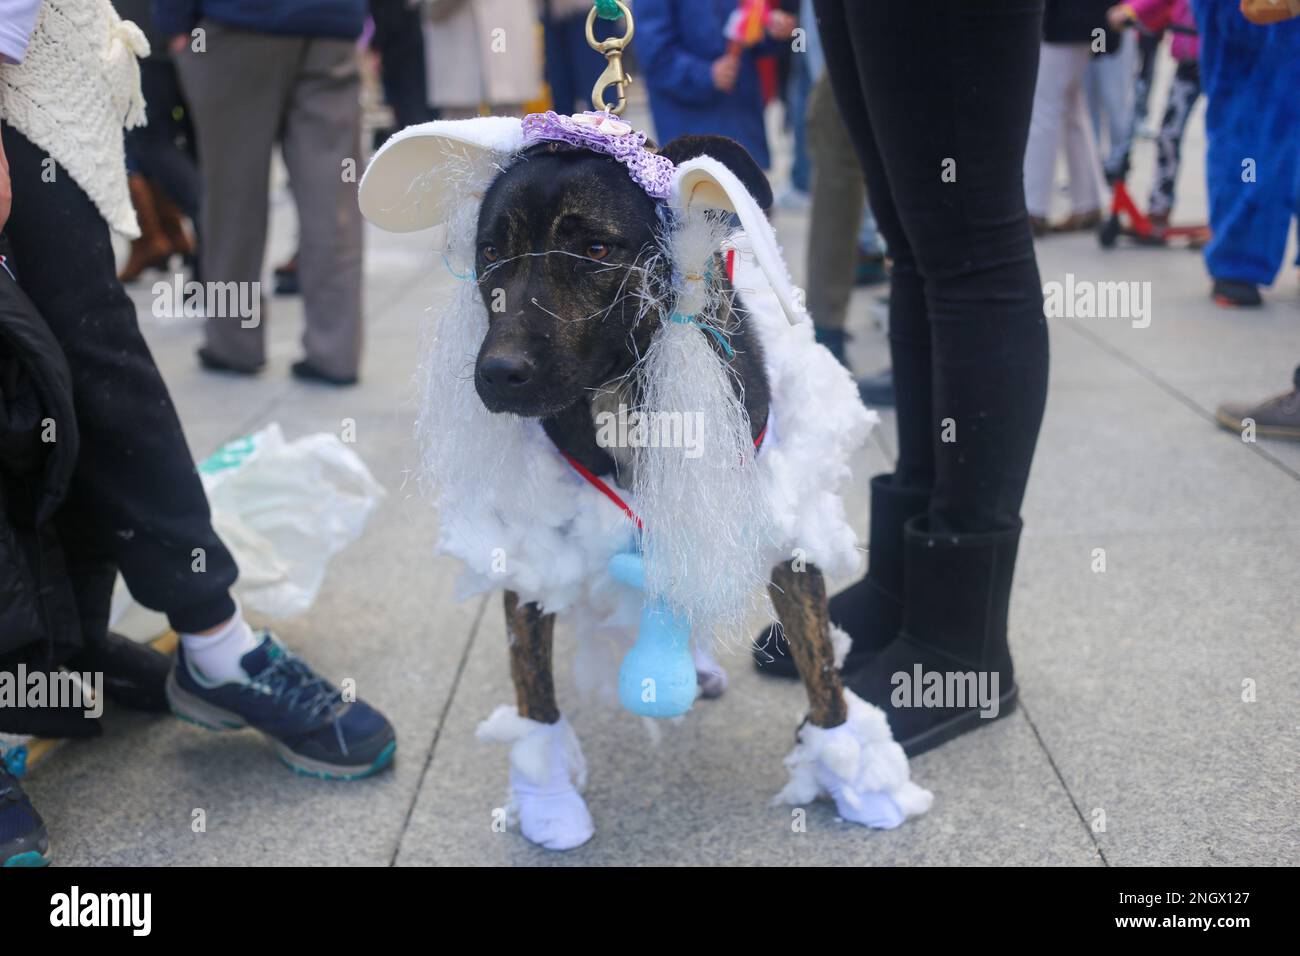 Aviles, Spain, 19th February, 2023: A dog dressed as a sheep during the Antroxaes Mascot Contest on February 18, 2023, in Aviles, Spain. Credit: Alberto Brevers / Alamy Live News Stock Photo